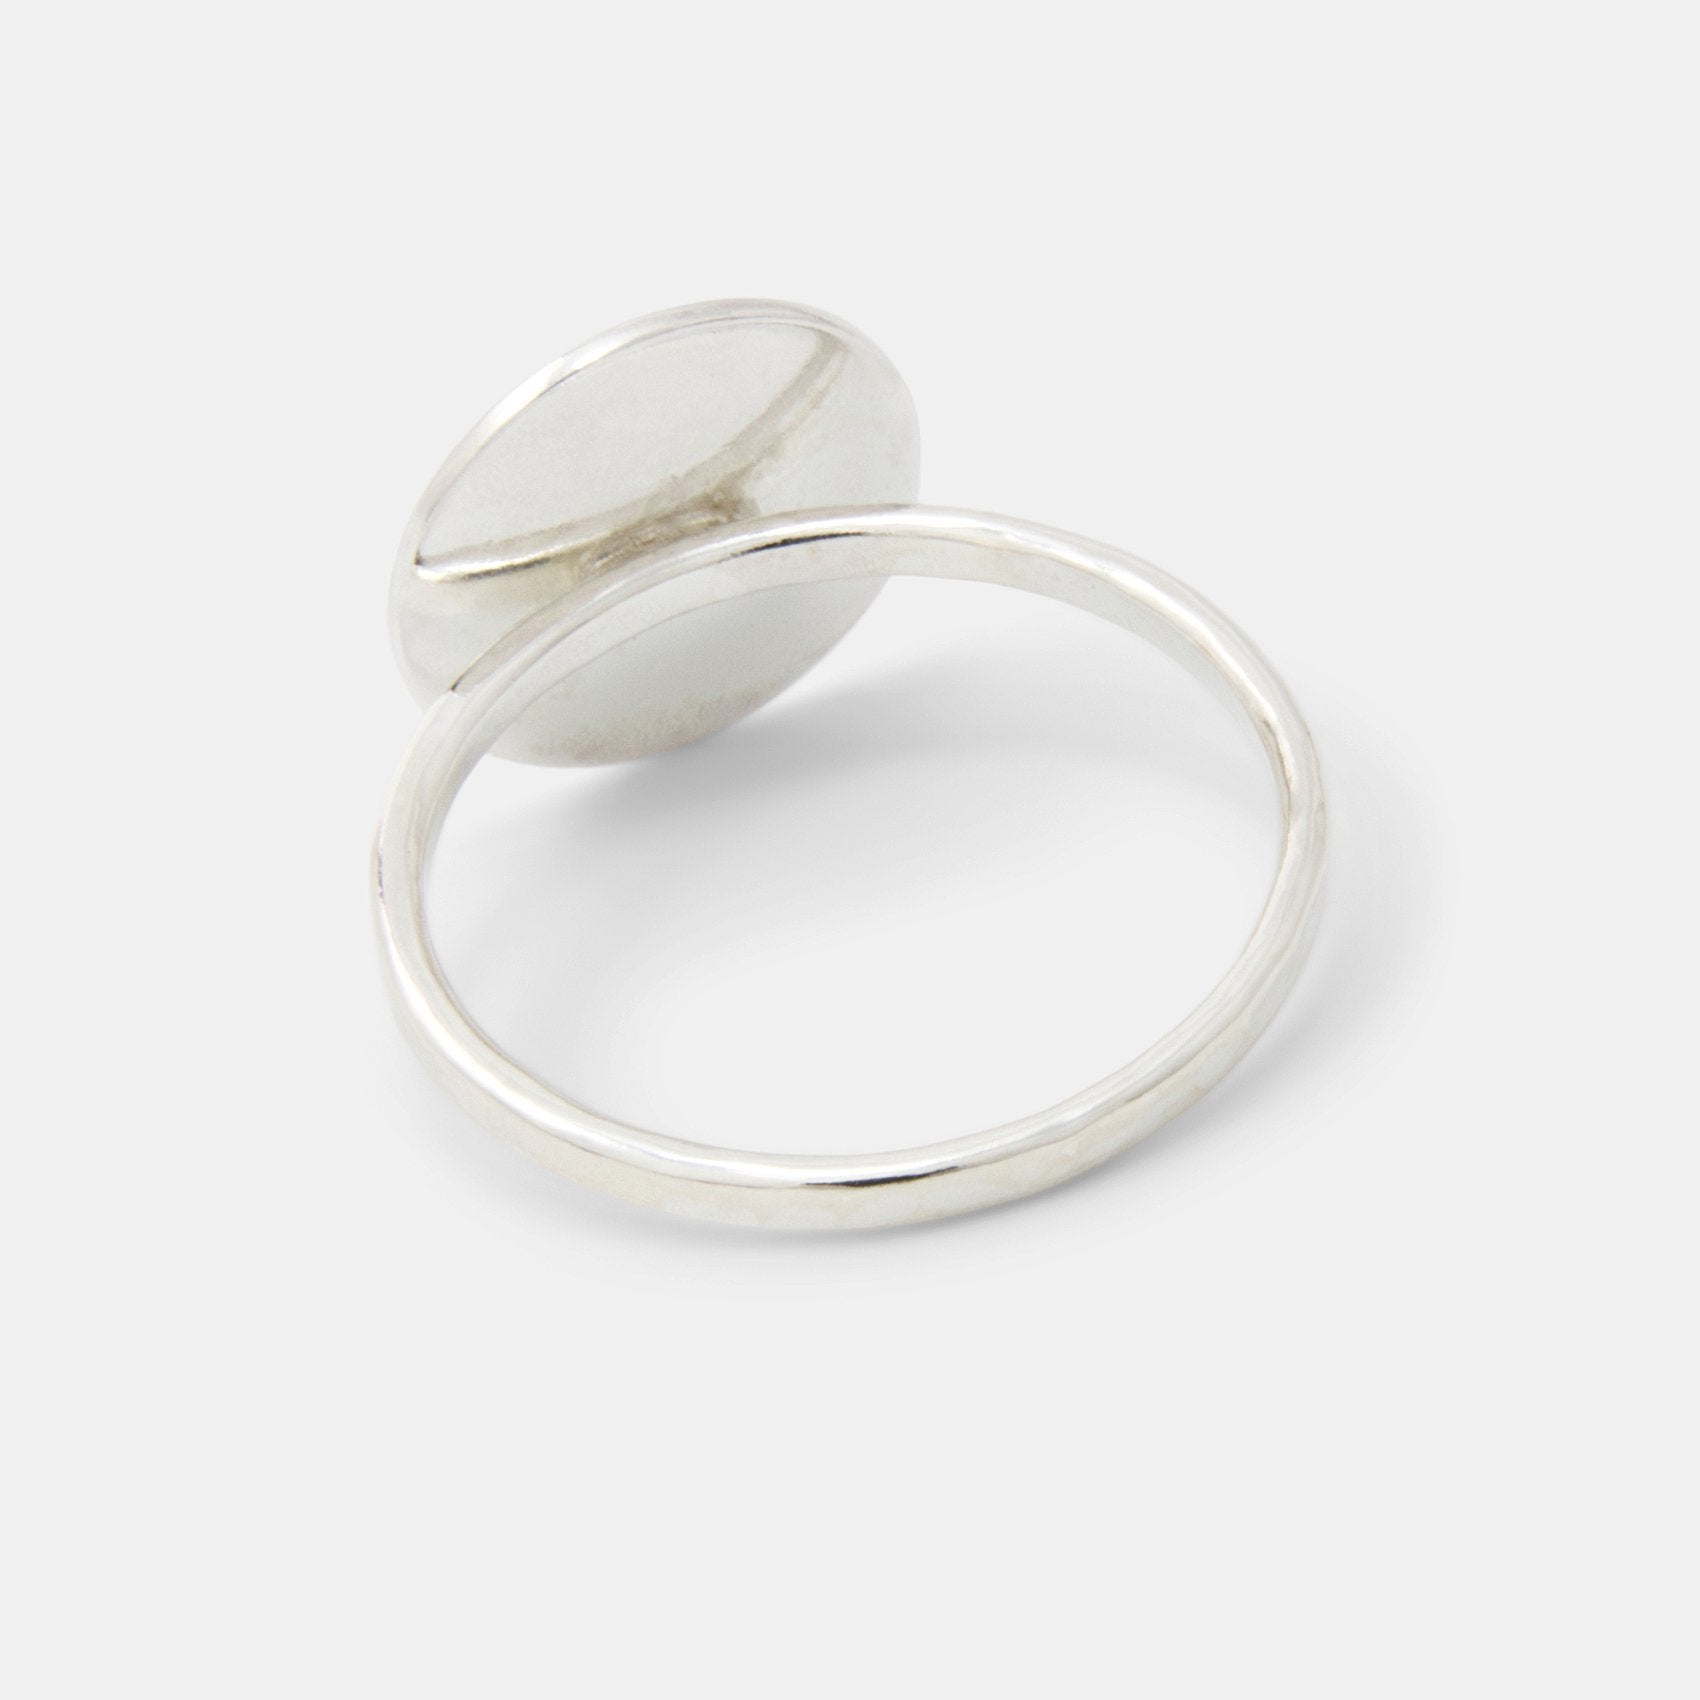 Dots texture silver cocktail ring - Simone Walsh Jewellery Australia